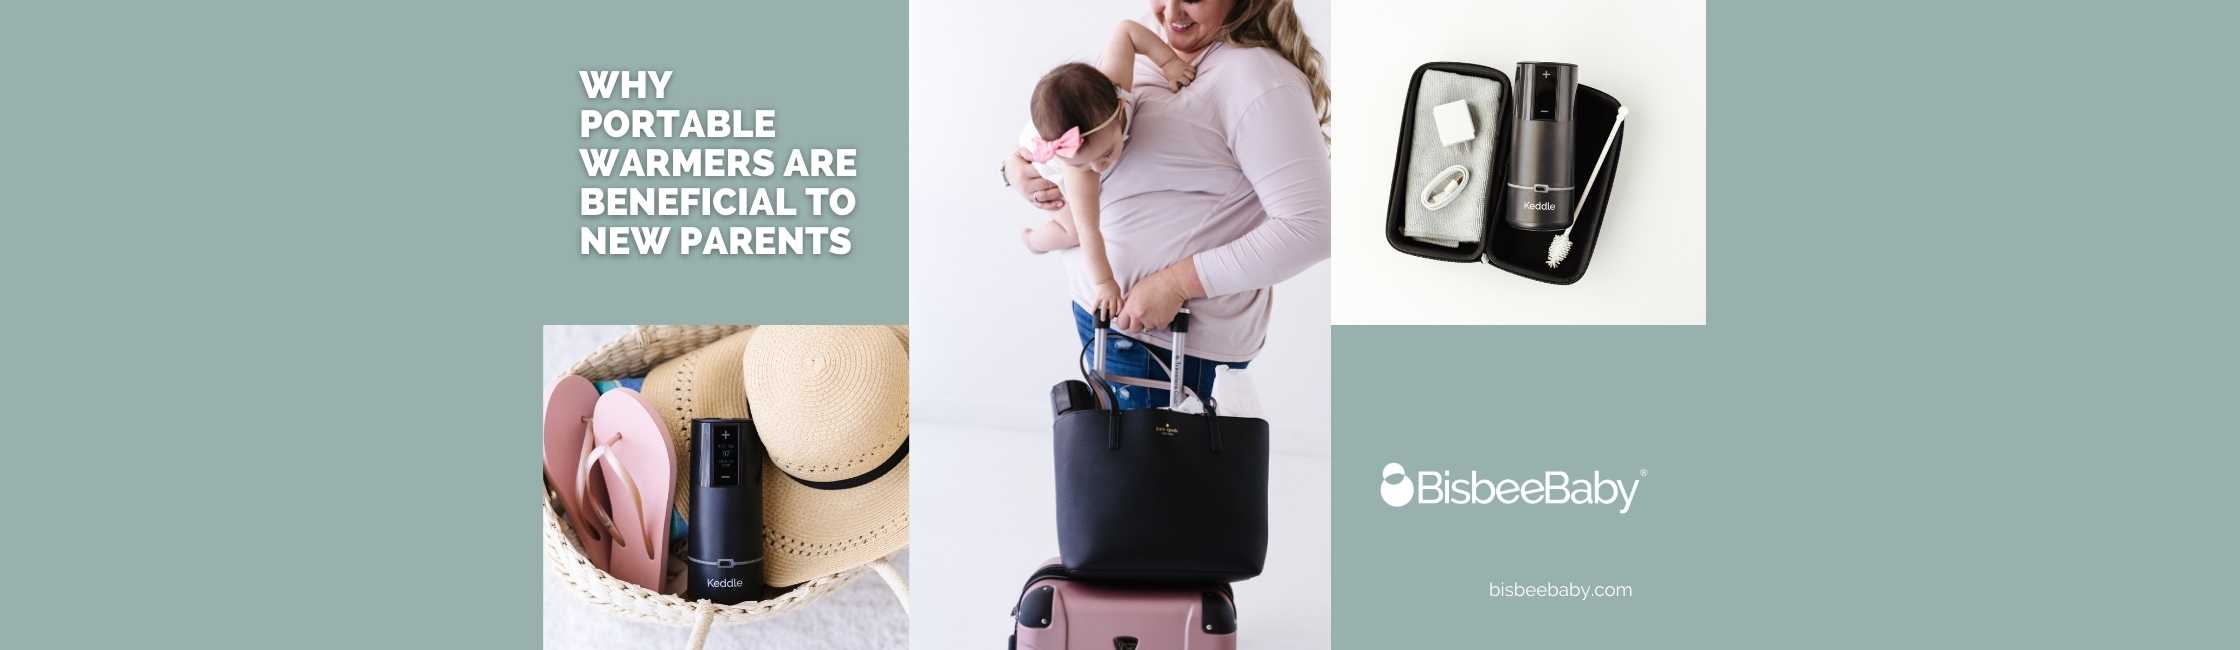 Why Portable Warmers Are Beneficial to New Parents